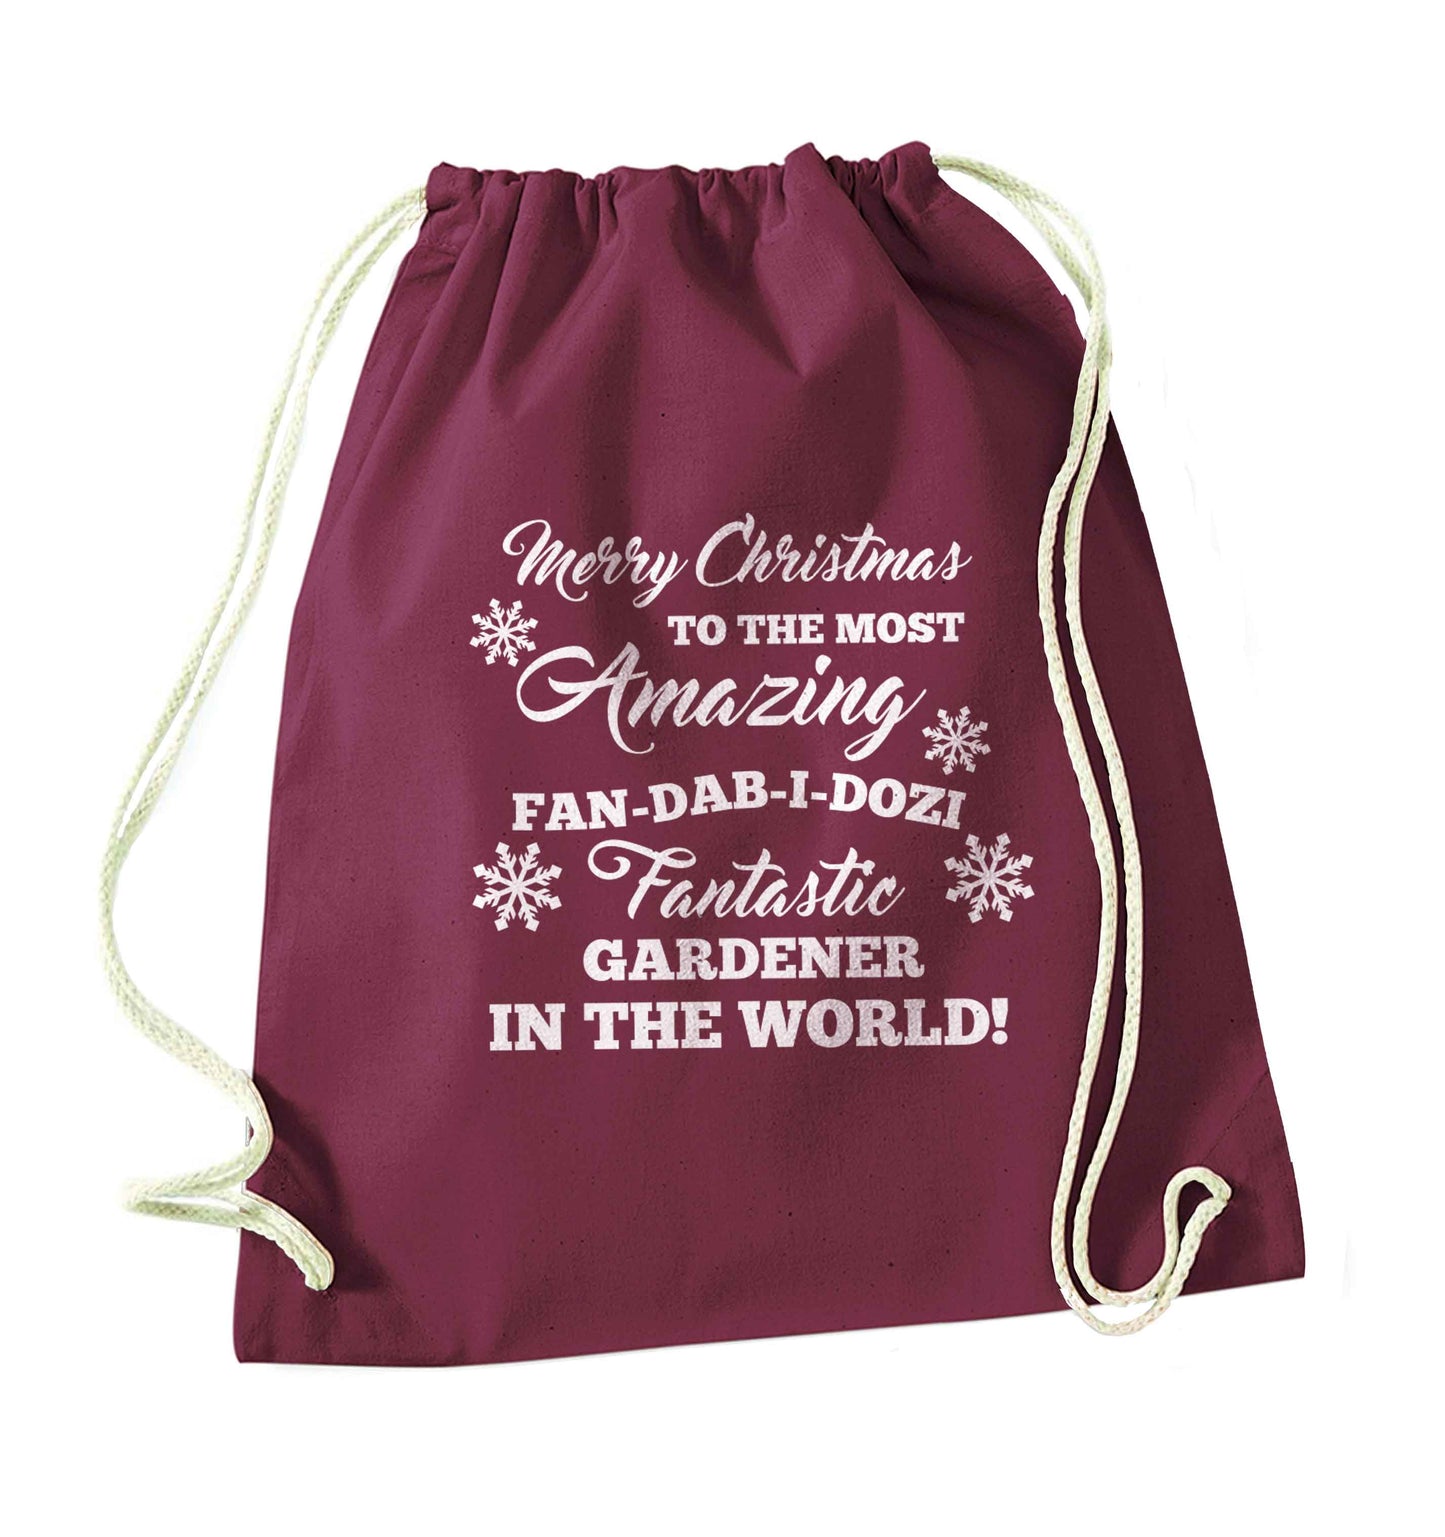 Merry Christmas to the most amazing gardener in the world! maroon drawstring bag